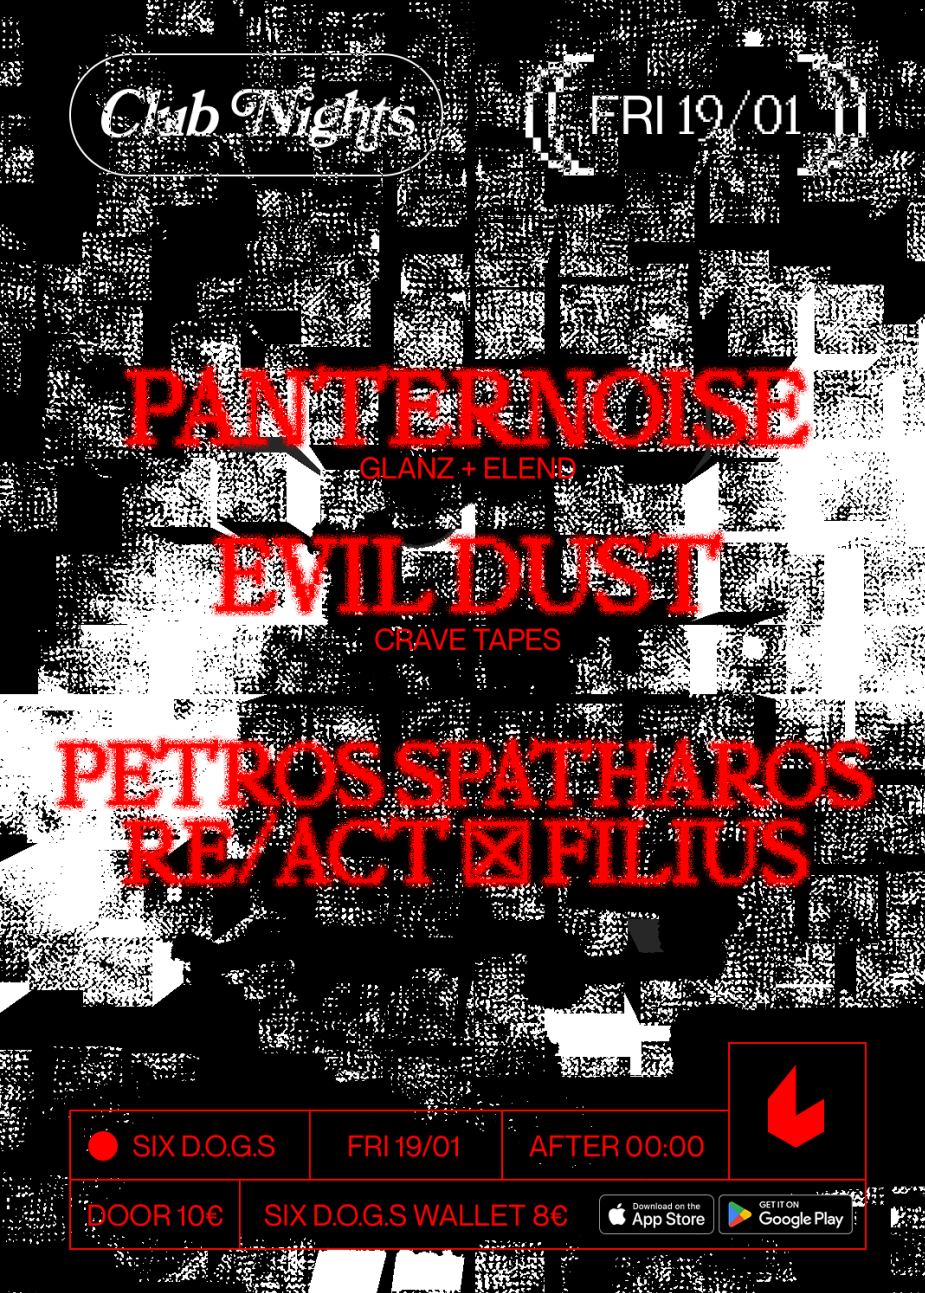 SIX D.O.G.S: PANTERNOISE [Glanz + Elend] · Evil Dust [Crave Tapes] - フライヤー表